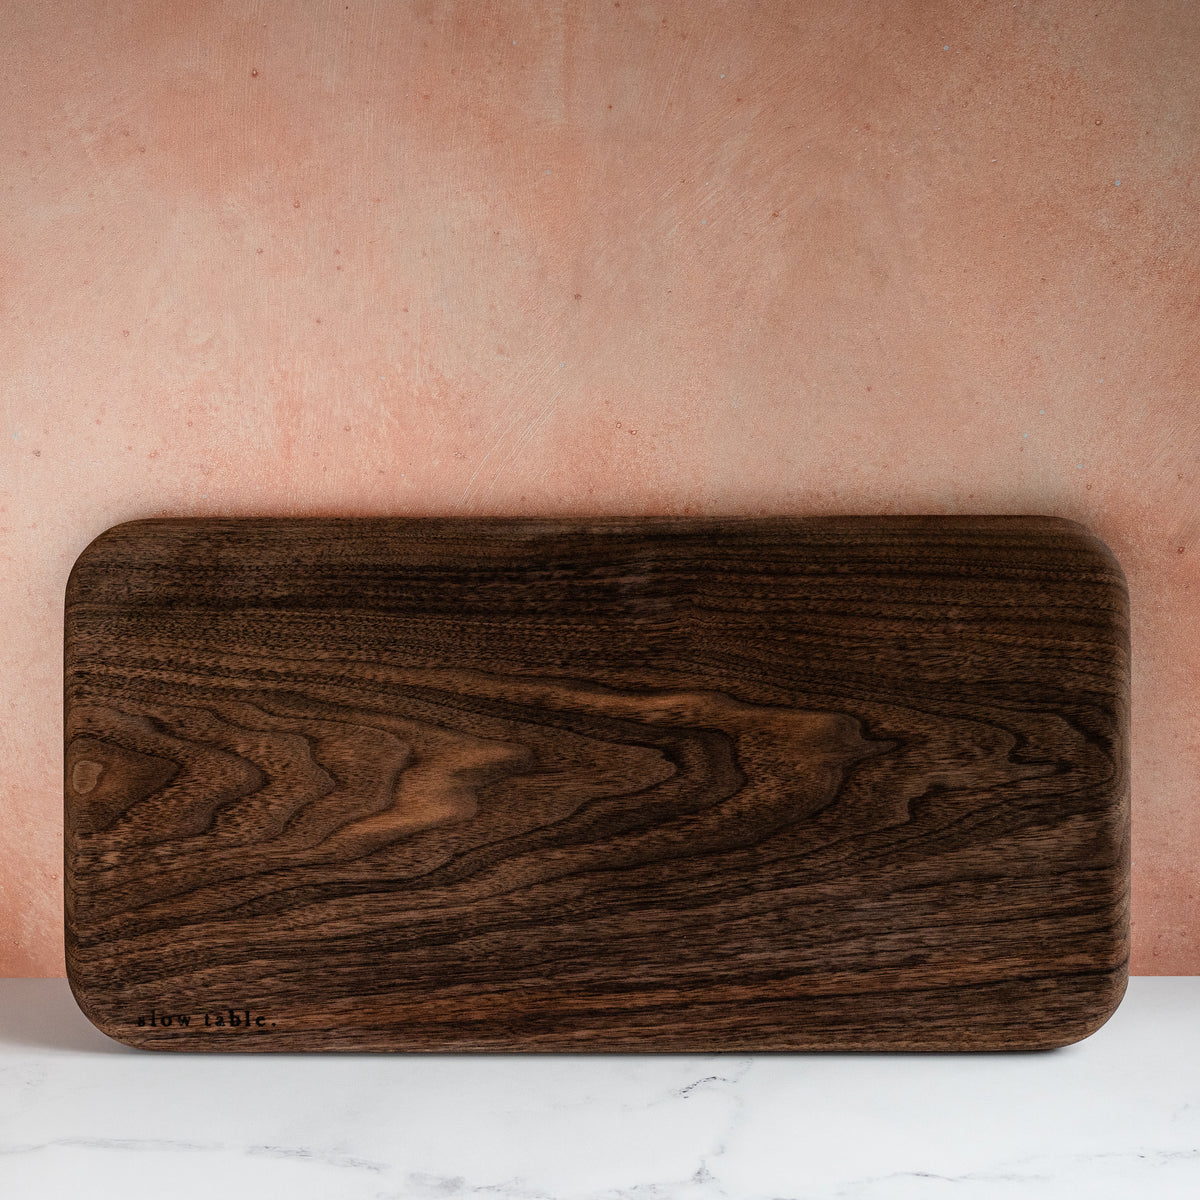 Rectangular, solid walnut wood serving/cutting board, with a fine wood grain, propped against a kitchen backsplash and resting on a marble countertop.